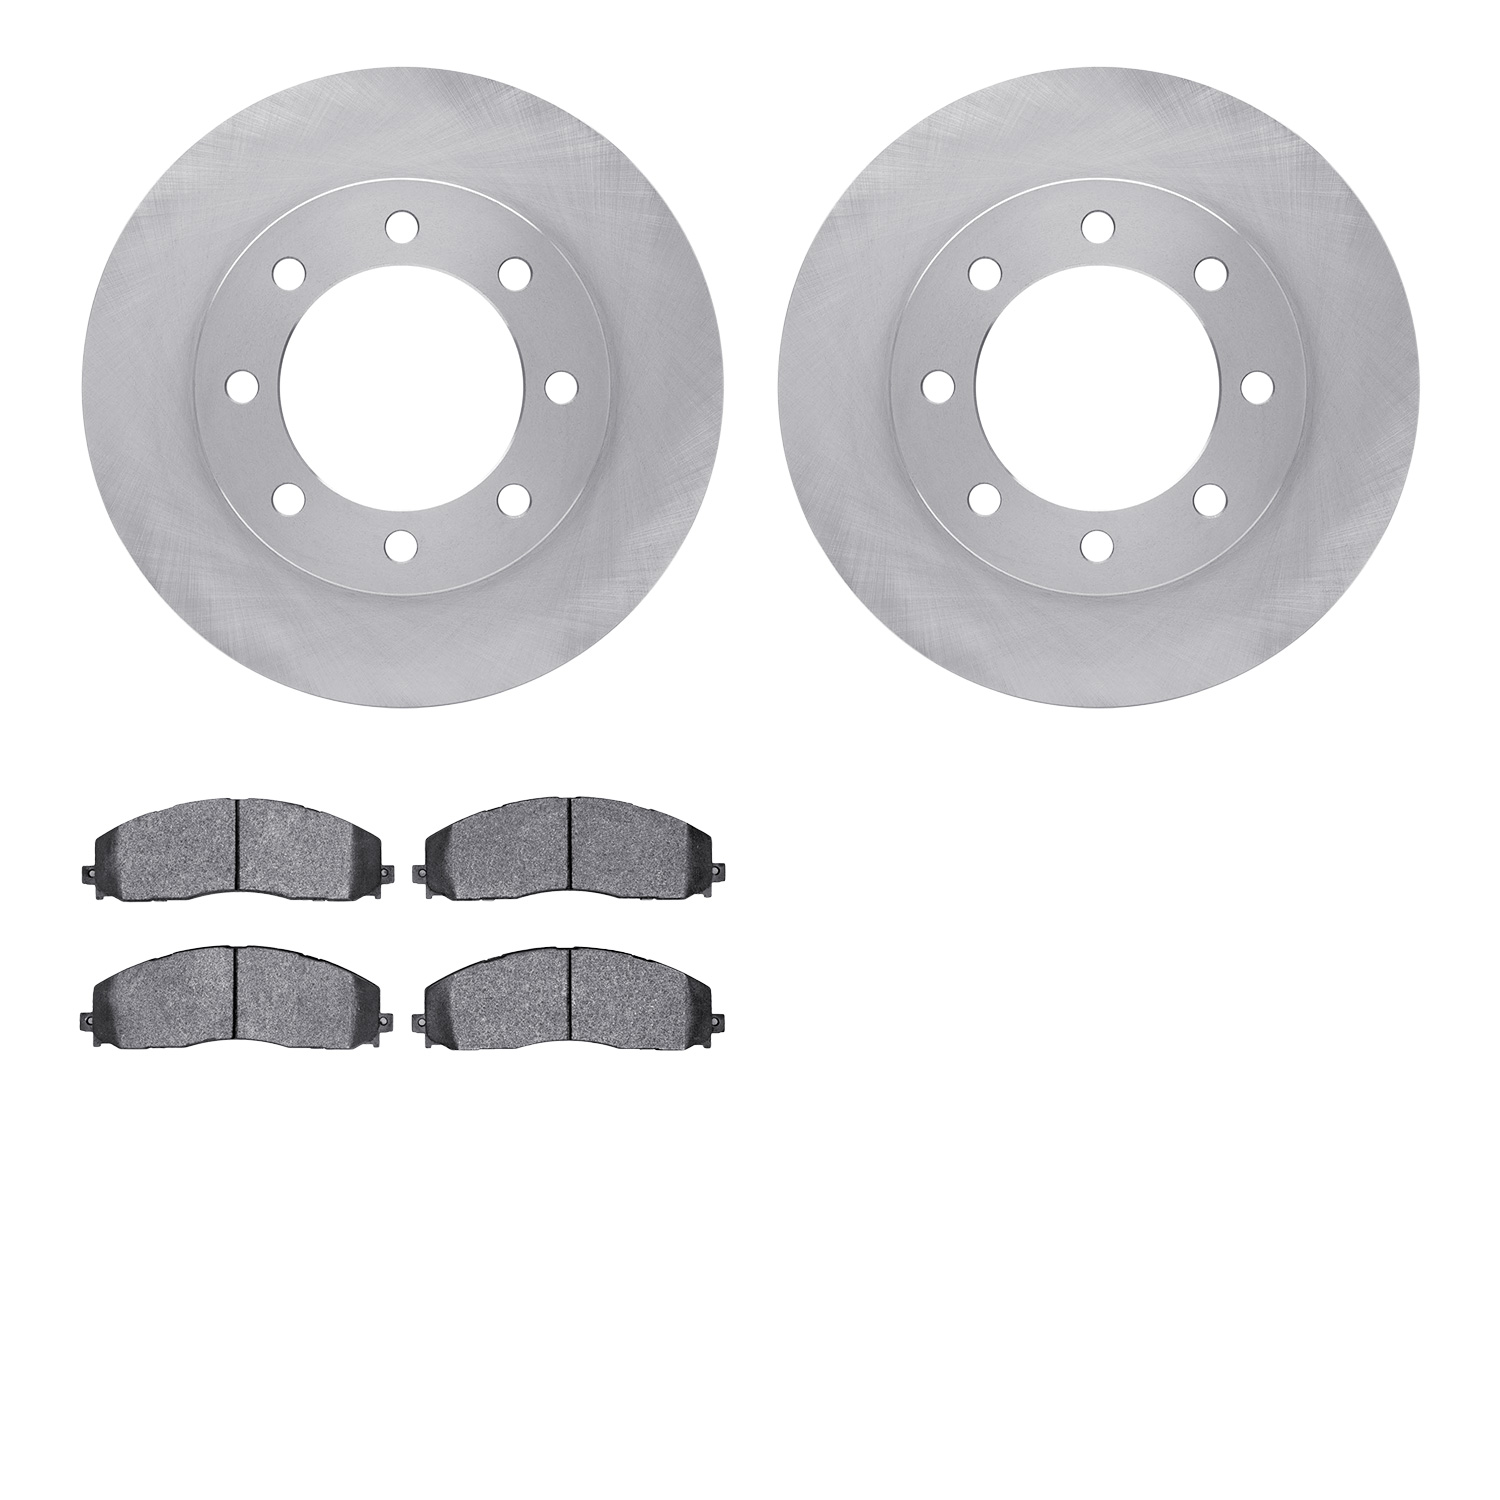 6502-99675 Brake Rotors w/5000 Advanced Brake Pads Kit, Fits Select Ford/Lincoln/Mercury/Mazda, Position: Front